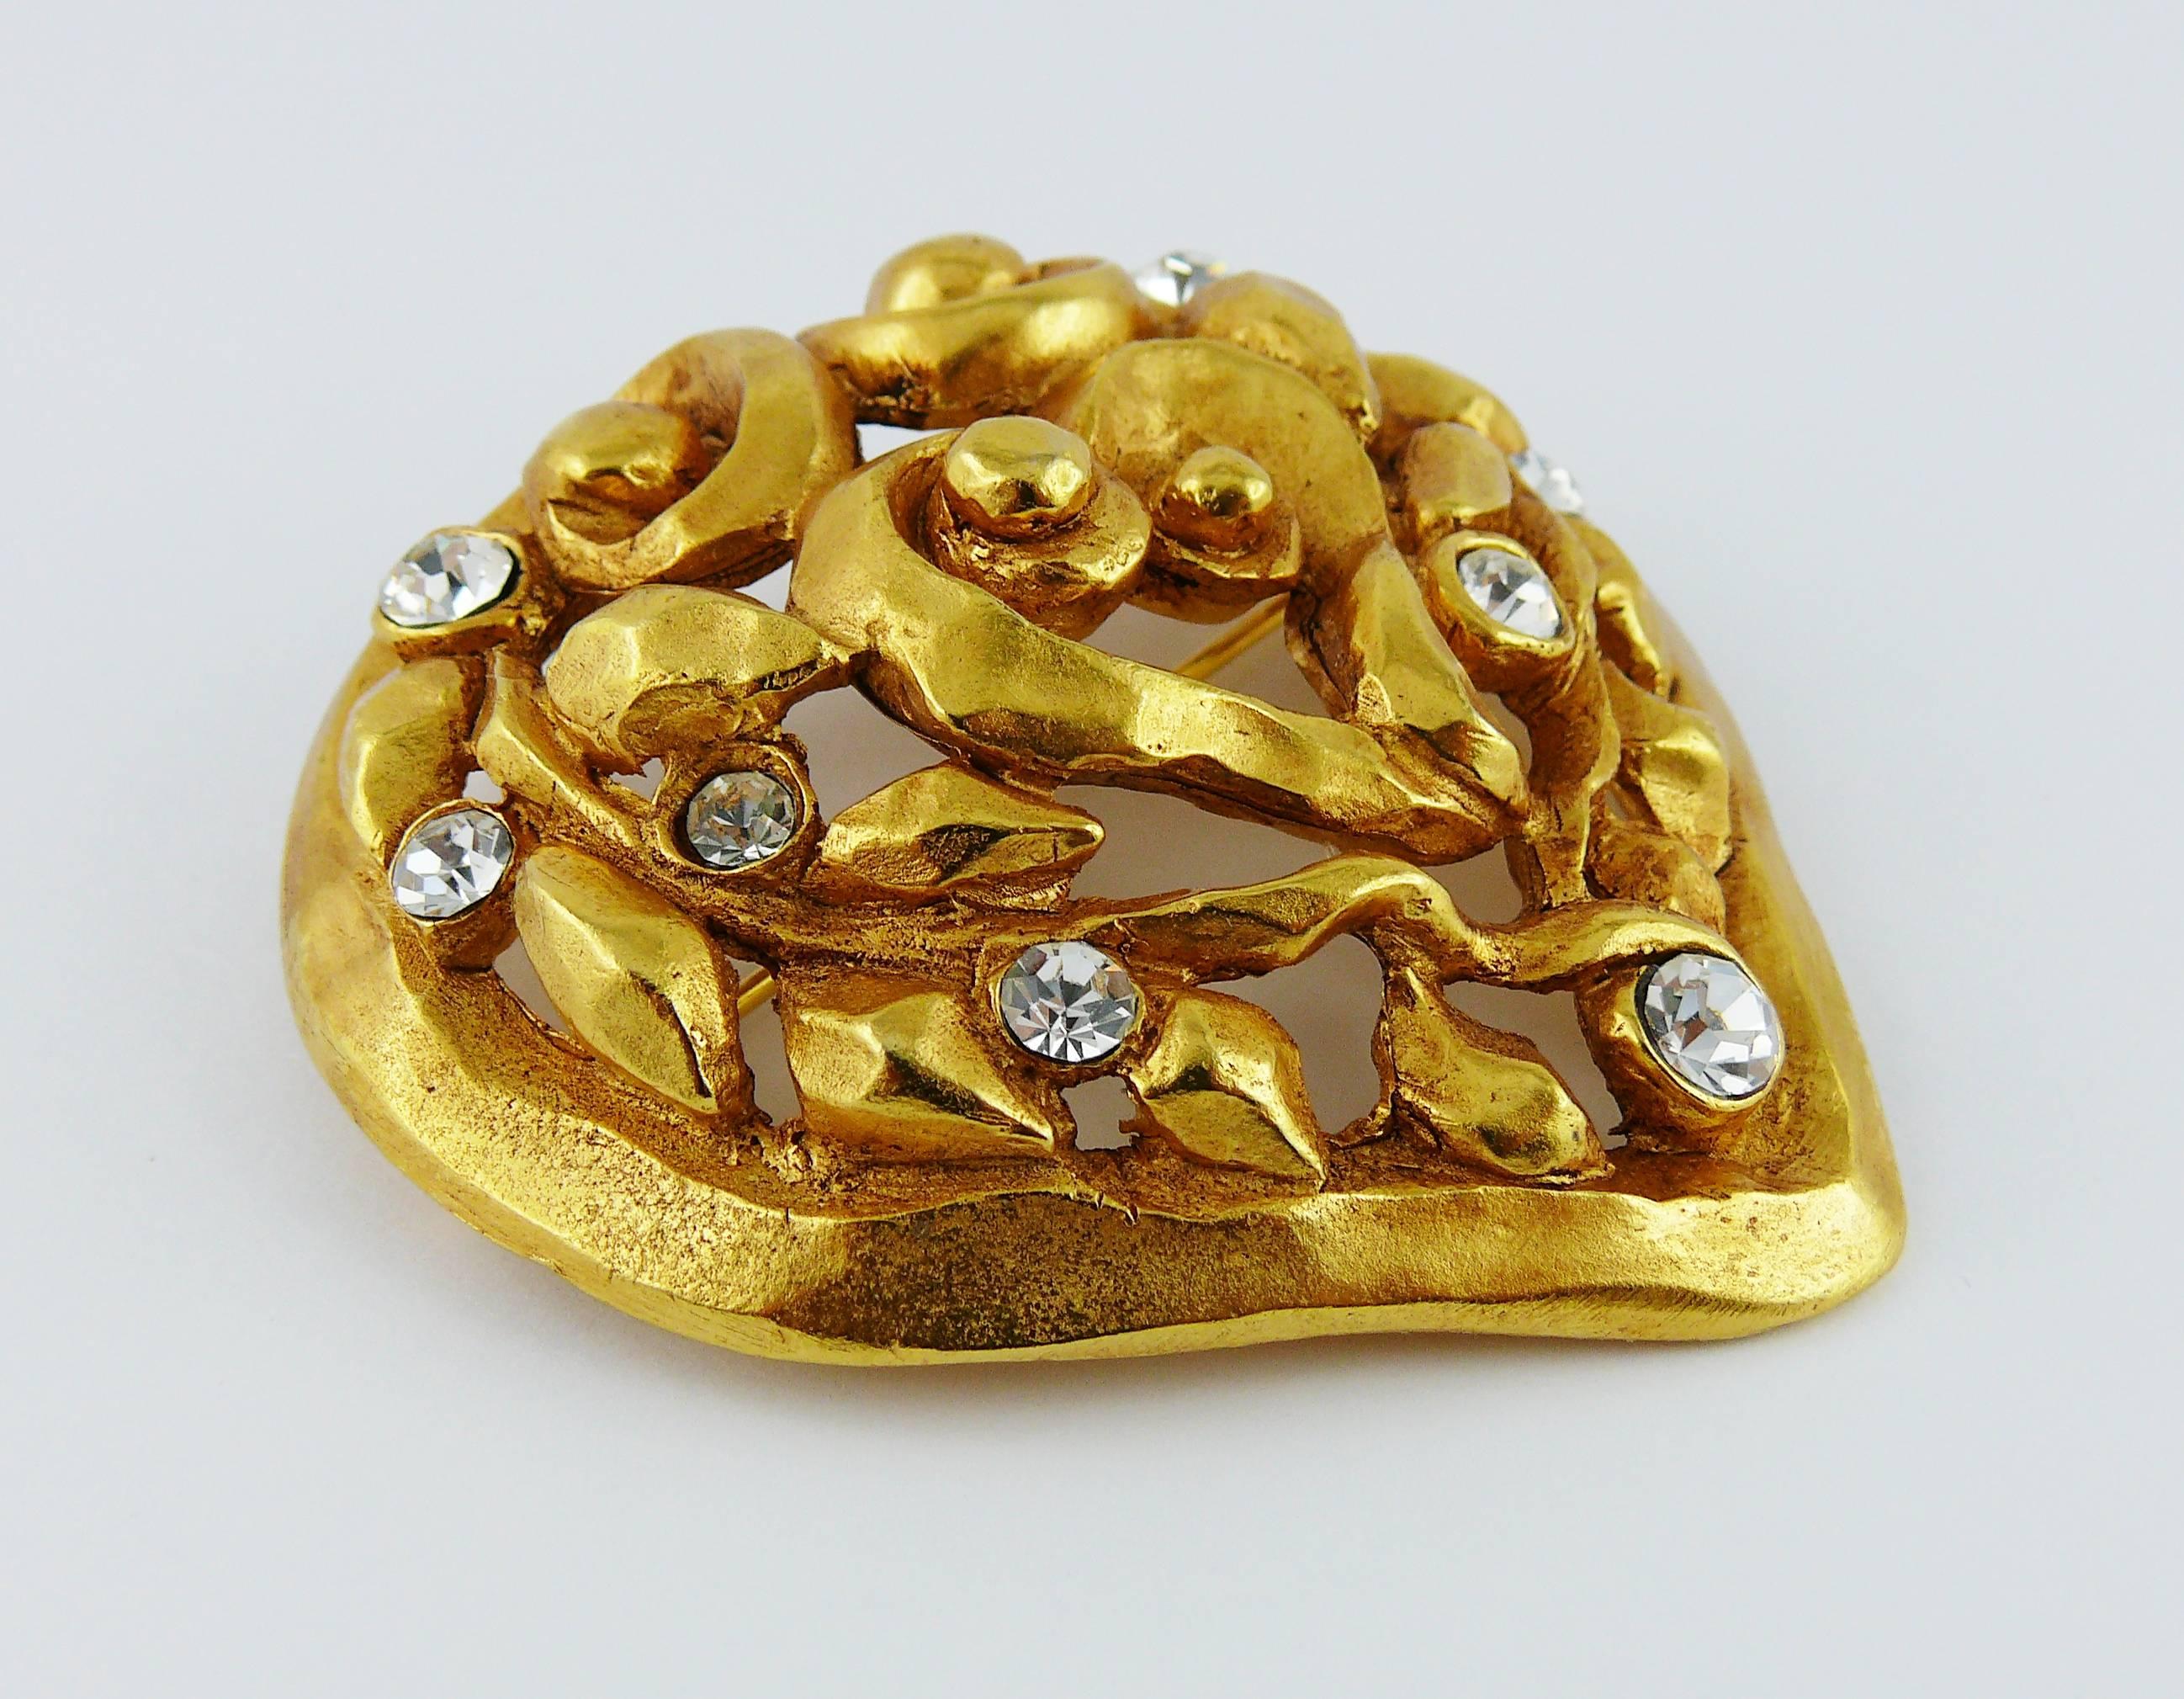 CHRISTIAN LACROIX vintage gorgeous gold tone heart brooch featuring an openwork abstract 3-D foliage design embellished with clear crystals.

Christmas 1991 limited edition.

Marked CHRISTIAN LACROIX CL Made in France.
Embossed "Noël  91